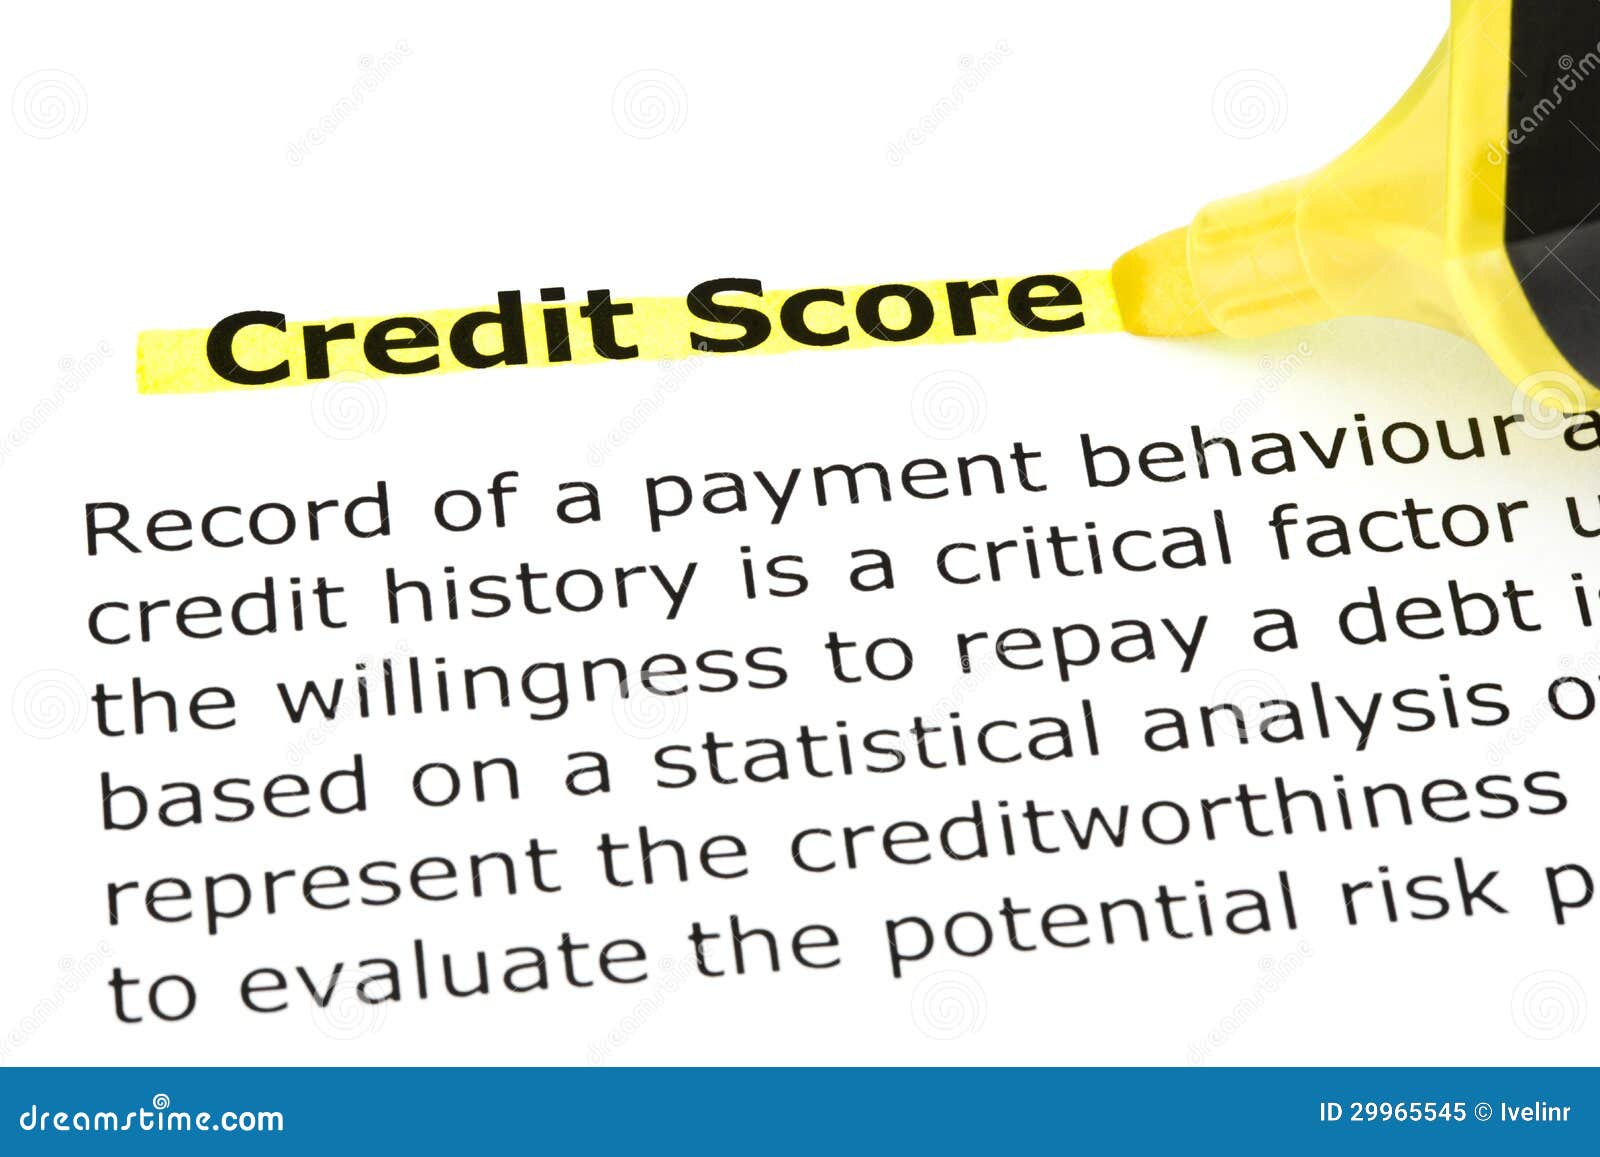 credit score highlighted in yellow